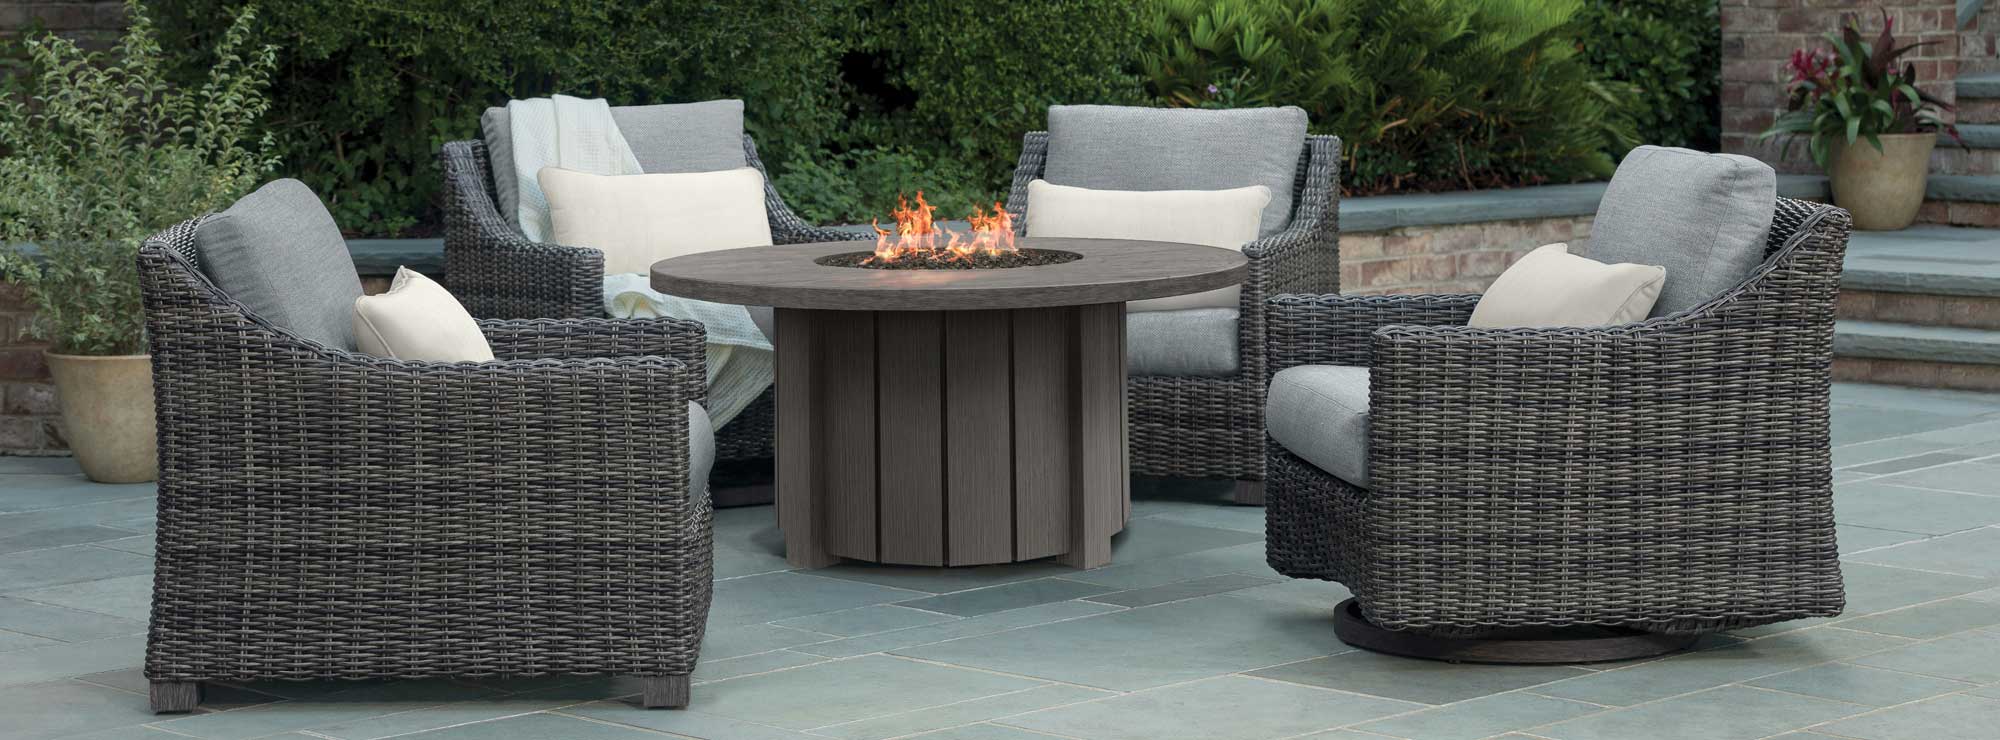 Avallon Outdoor Fire Chat Set by Ebel Banner